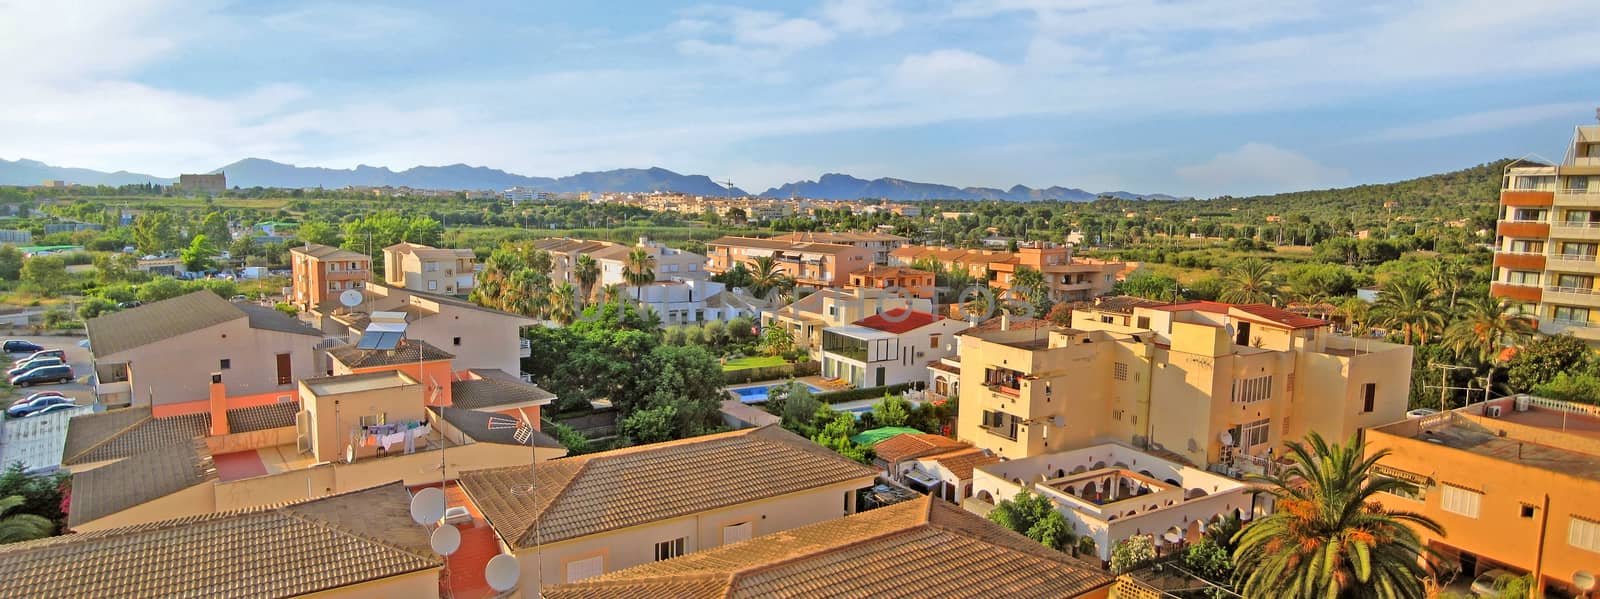 Alcudia, Majorca, Spain - June 27, 2008: Panorama view over residential buildings / homes city of Alcudia towards Tramuntana mountains, north of Majorca